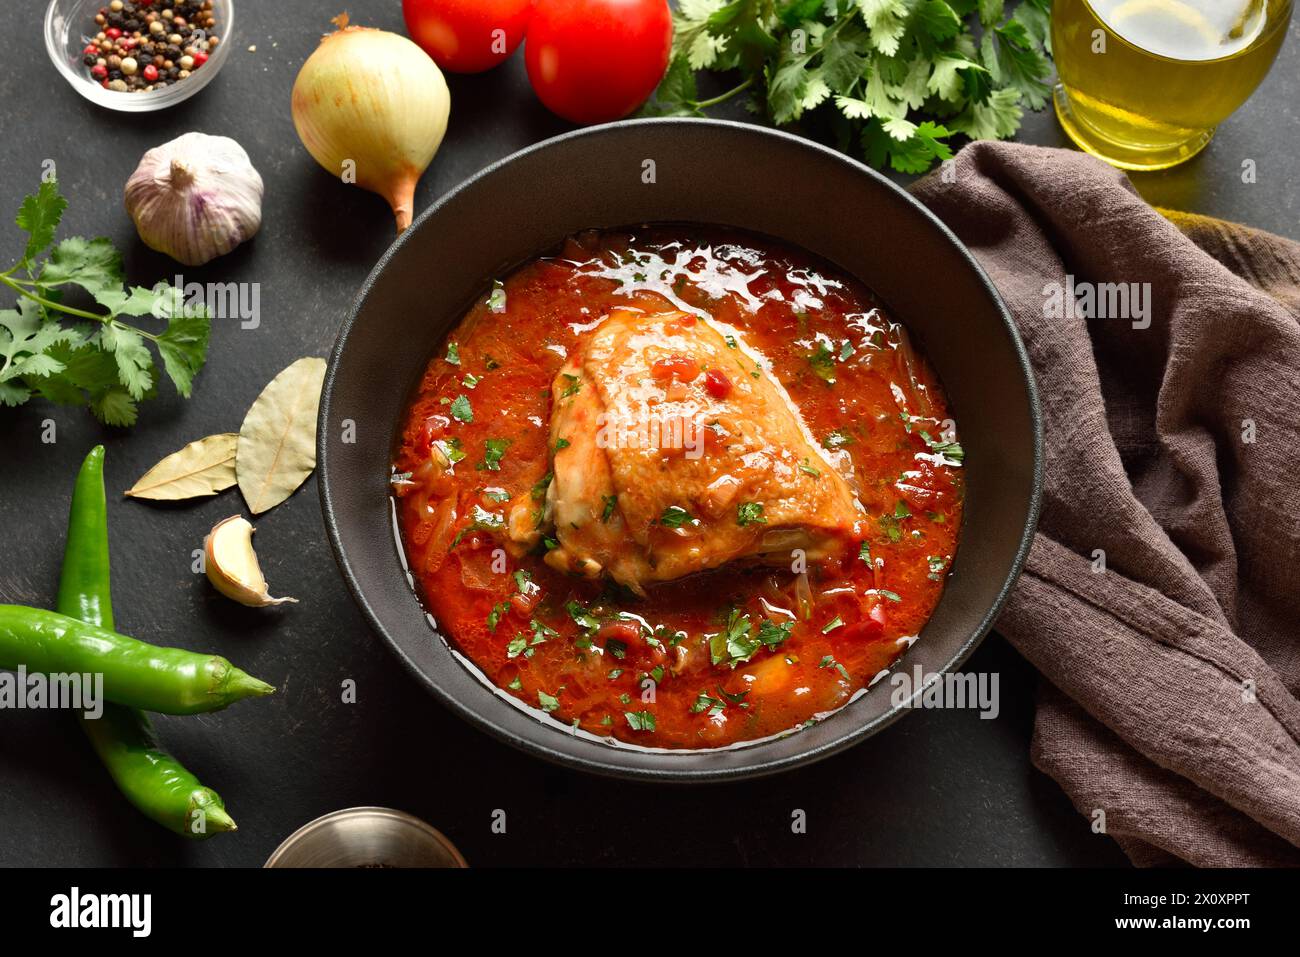 Baked chicken with tomato gravy and herbs in bowl over dark stone background. Tasty homemade chicken stew for dinner. Close up view Stock Photo